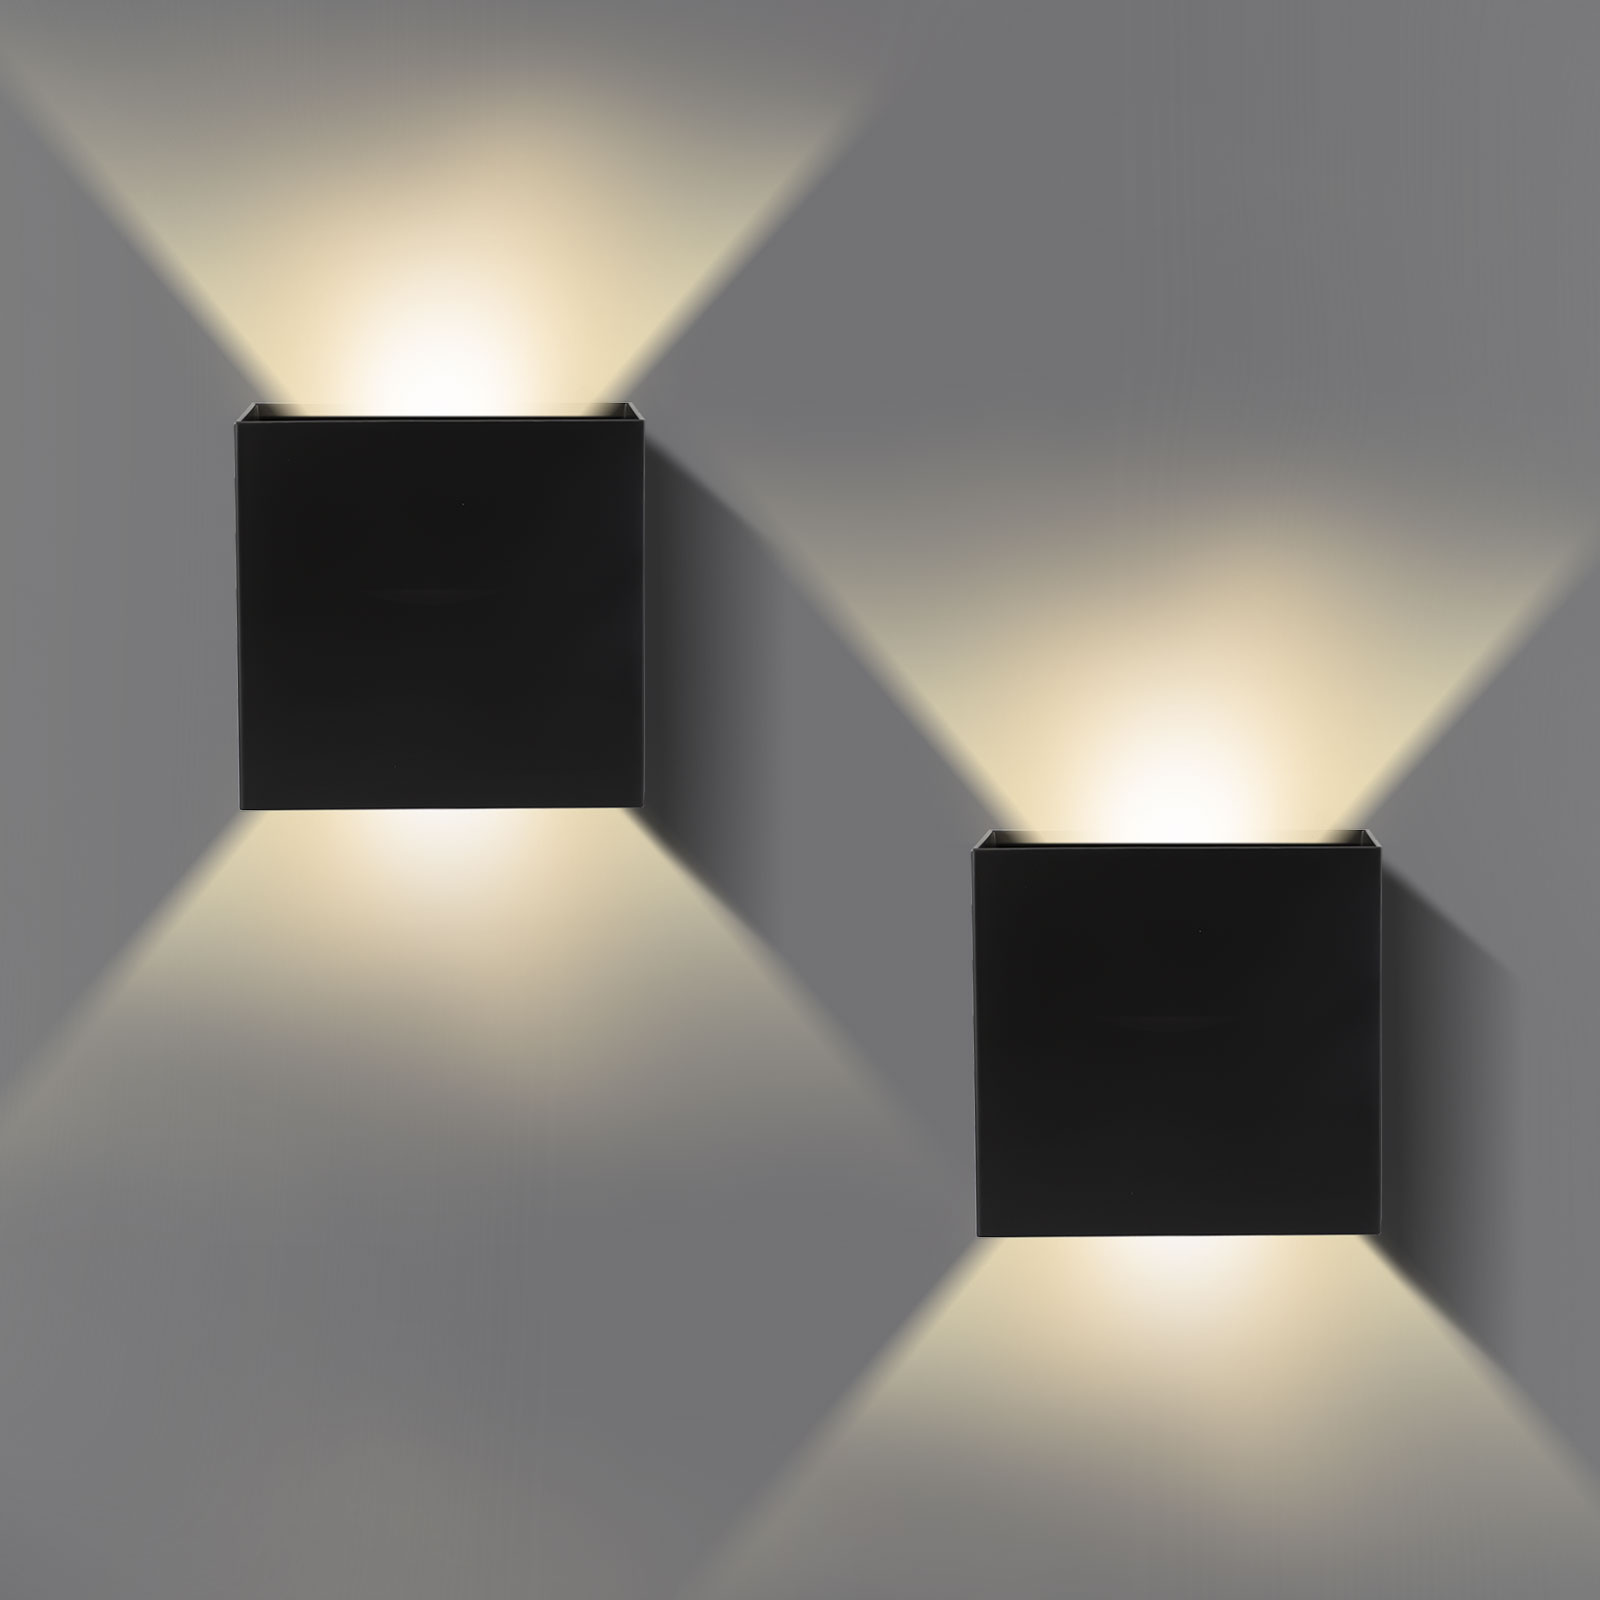 Details about   Cube LED Wall Light Modern Up Down Sconce Lighting Fixture Lamp Indoor Outdoor 